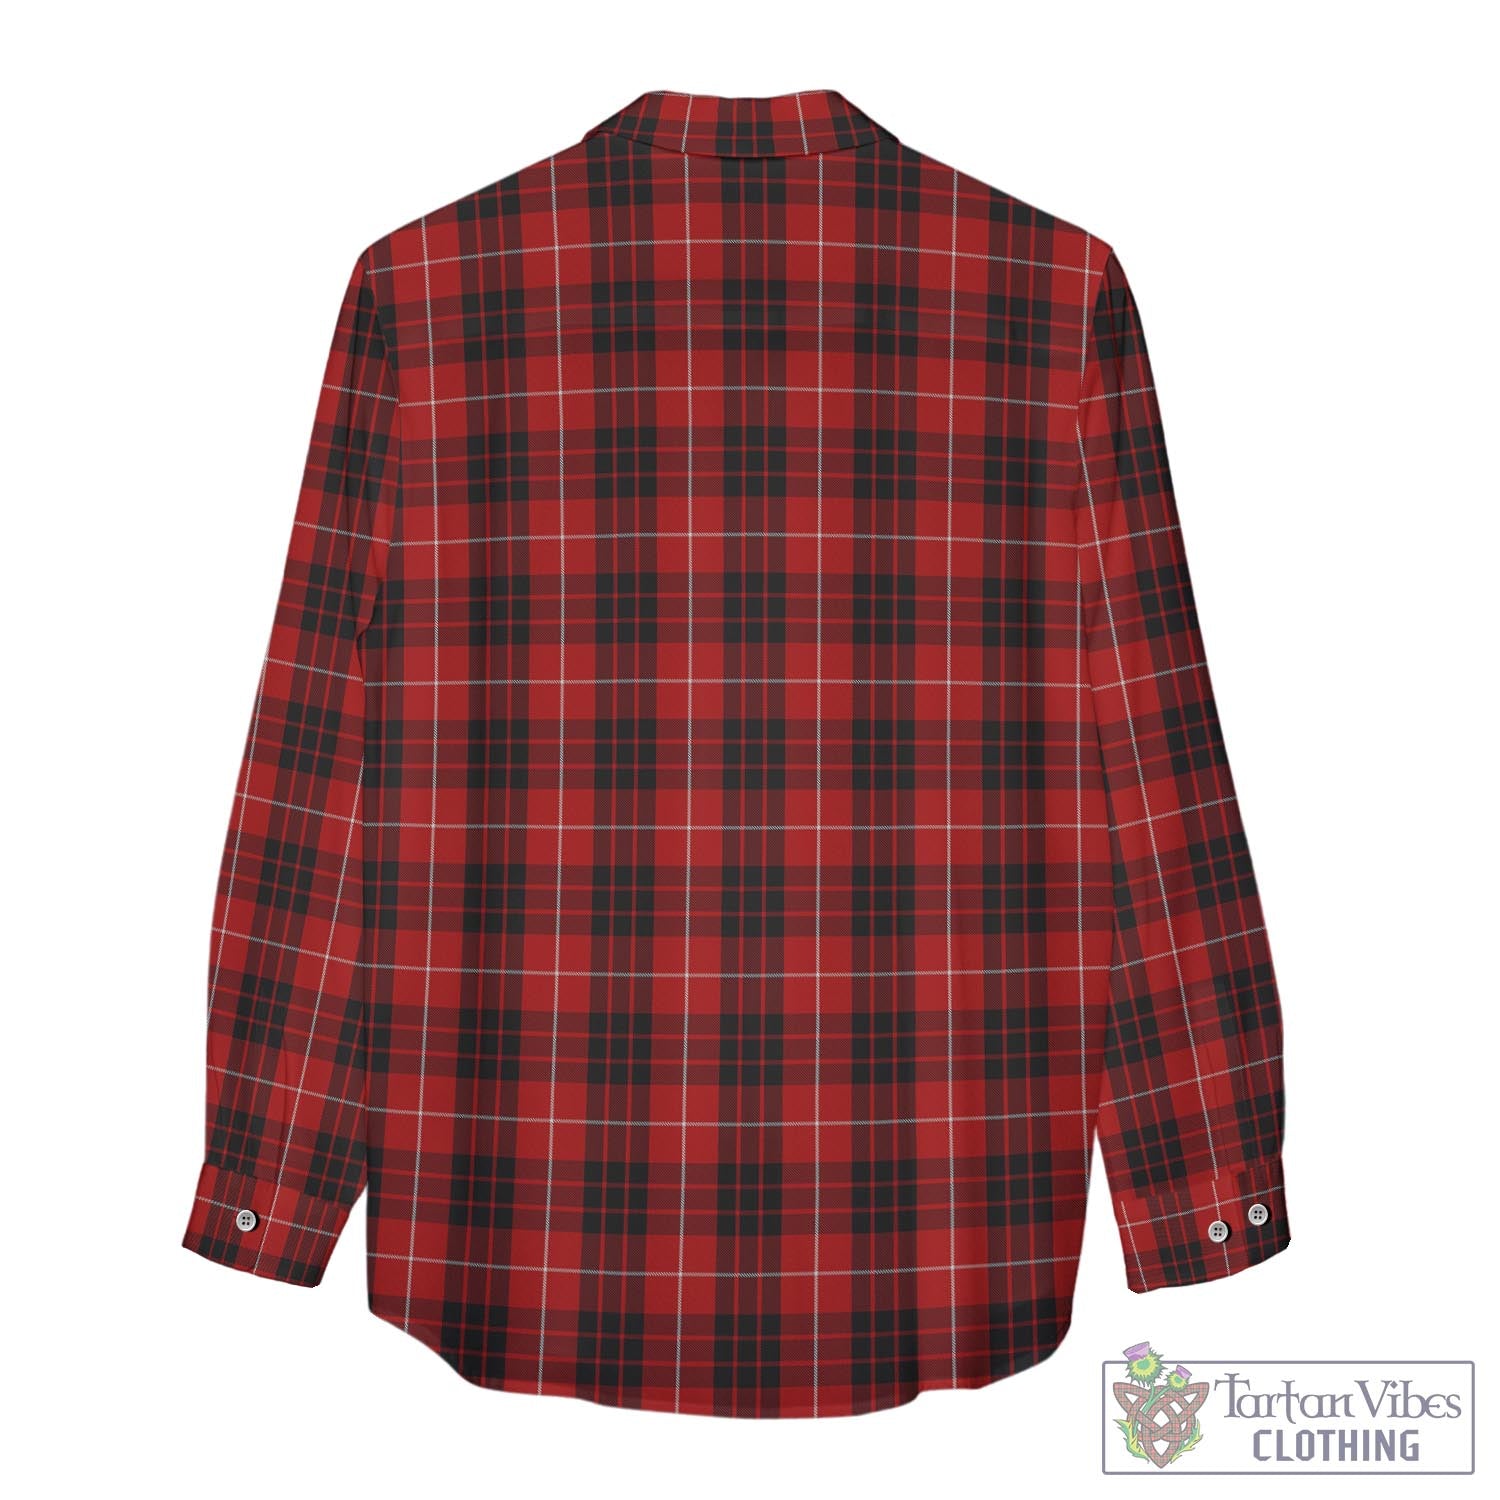 Tartan Vibes Clothing Munro Black and Red Tartan Womens Casual Shirt with Family Crest